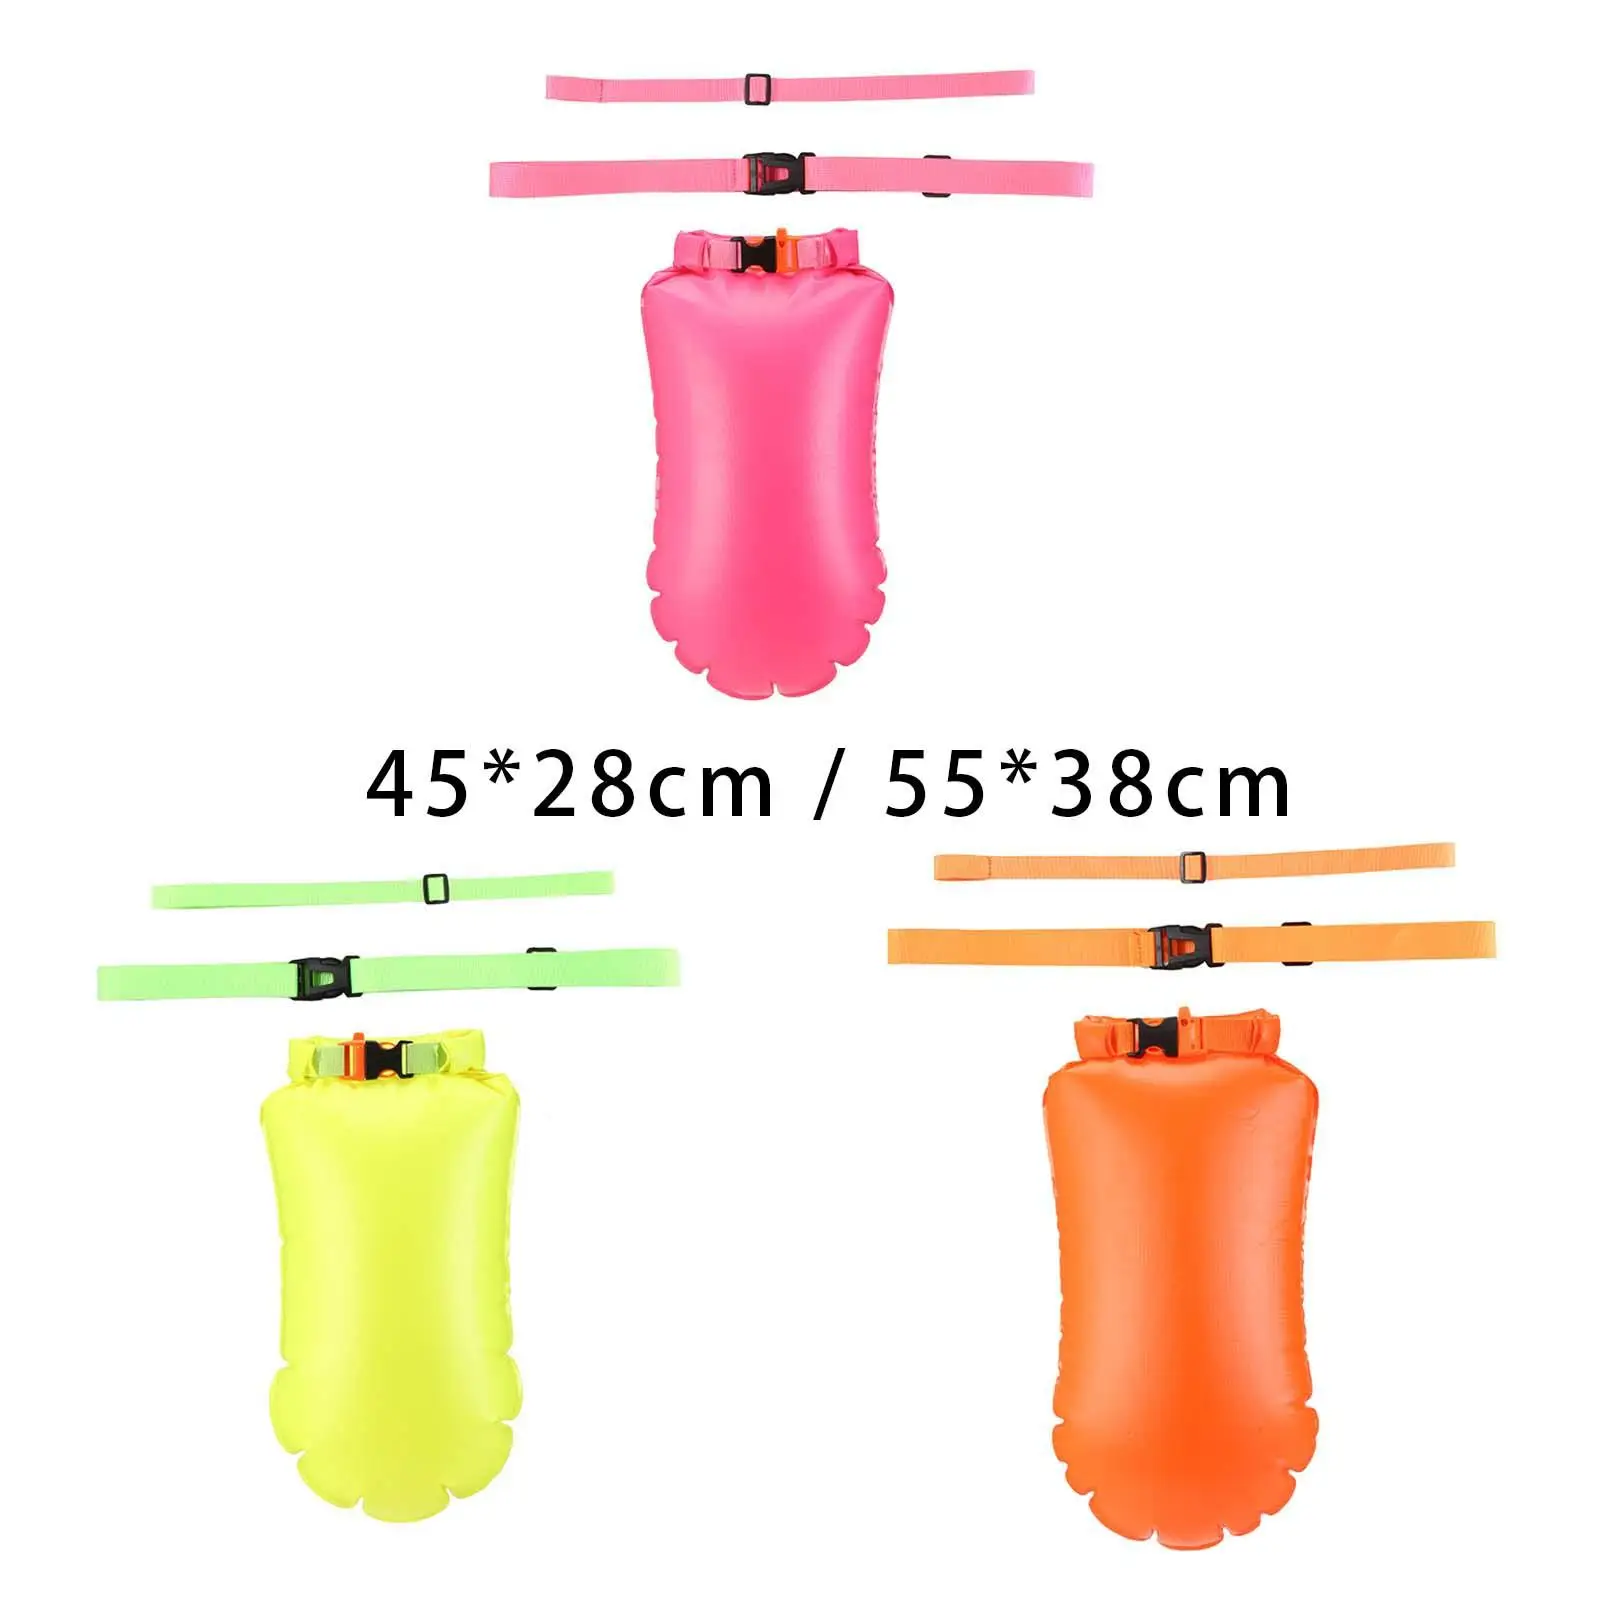 

Safety Swim Buoy Open Water Swimming Float Waterproof Storage Air Bag Ultralight Floating Bag for Boating Outdoor Rafting Kayak